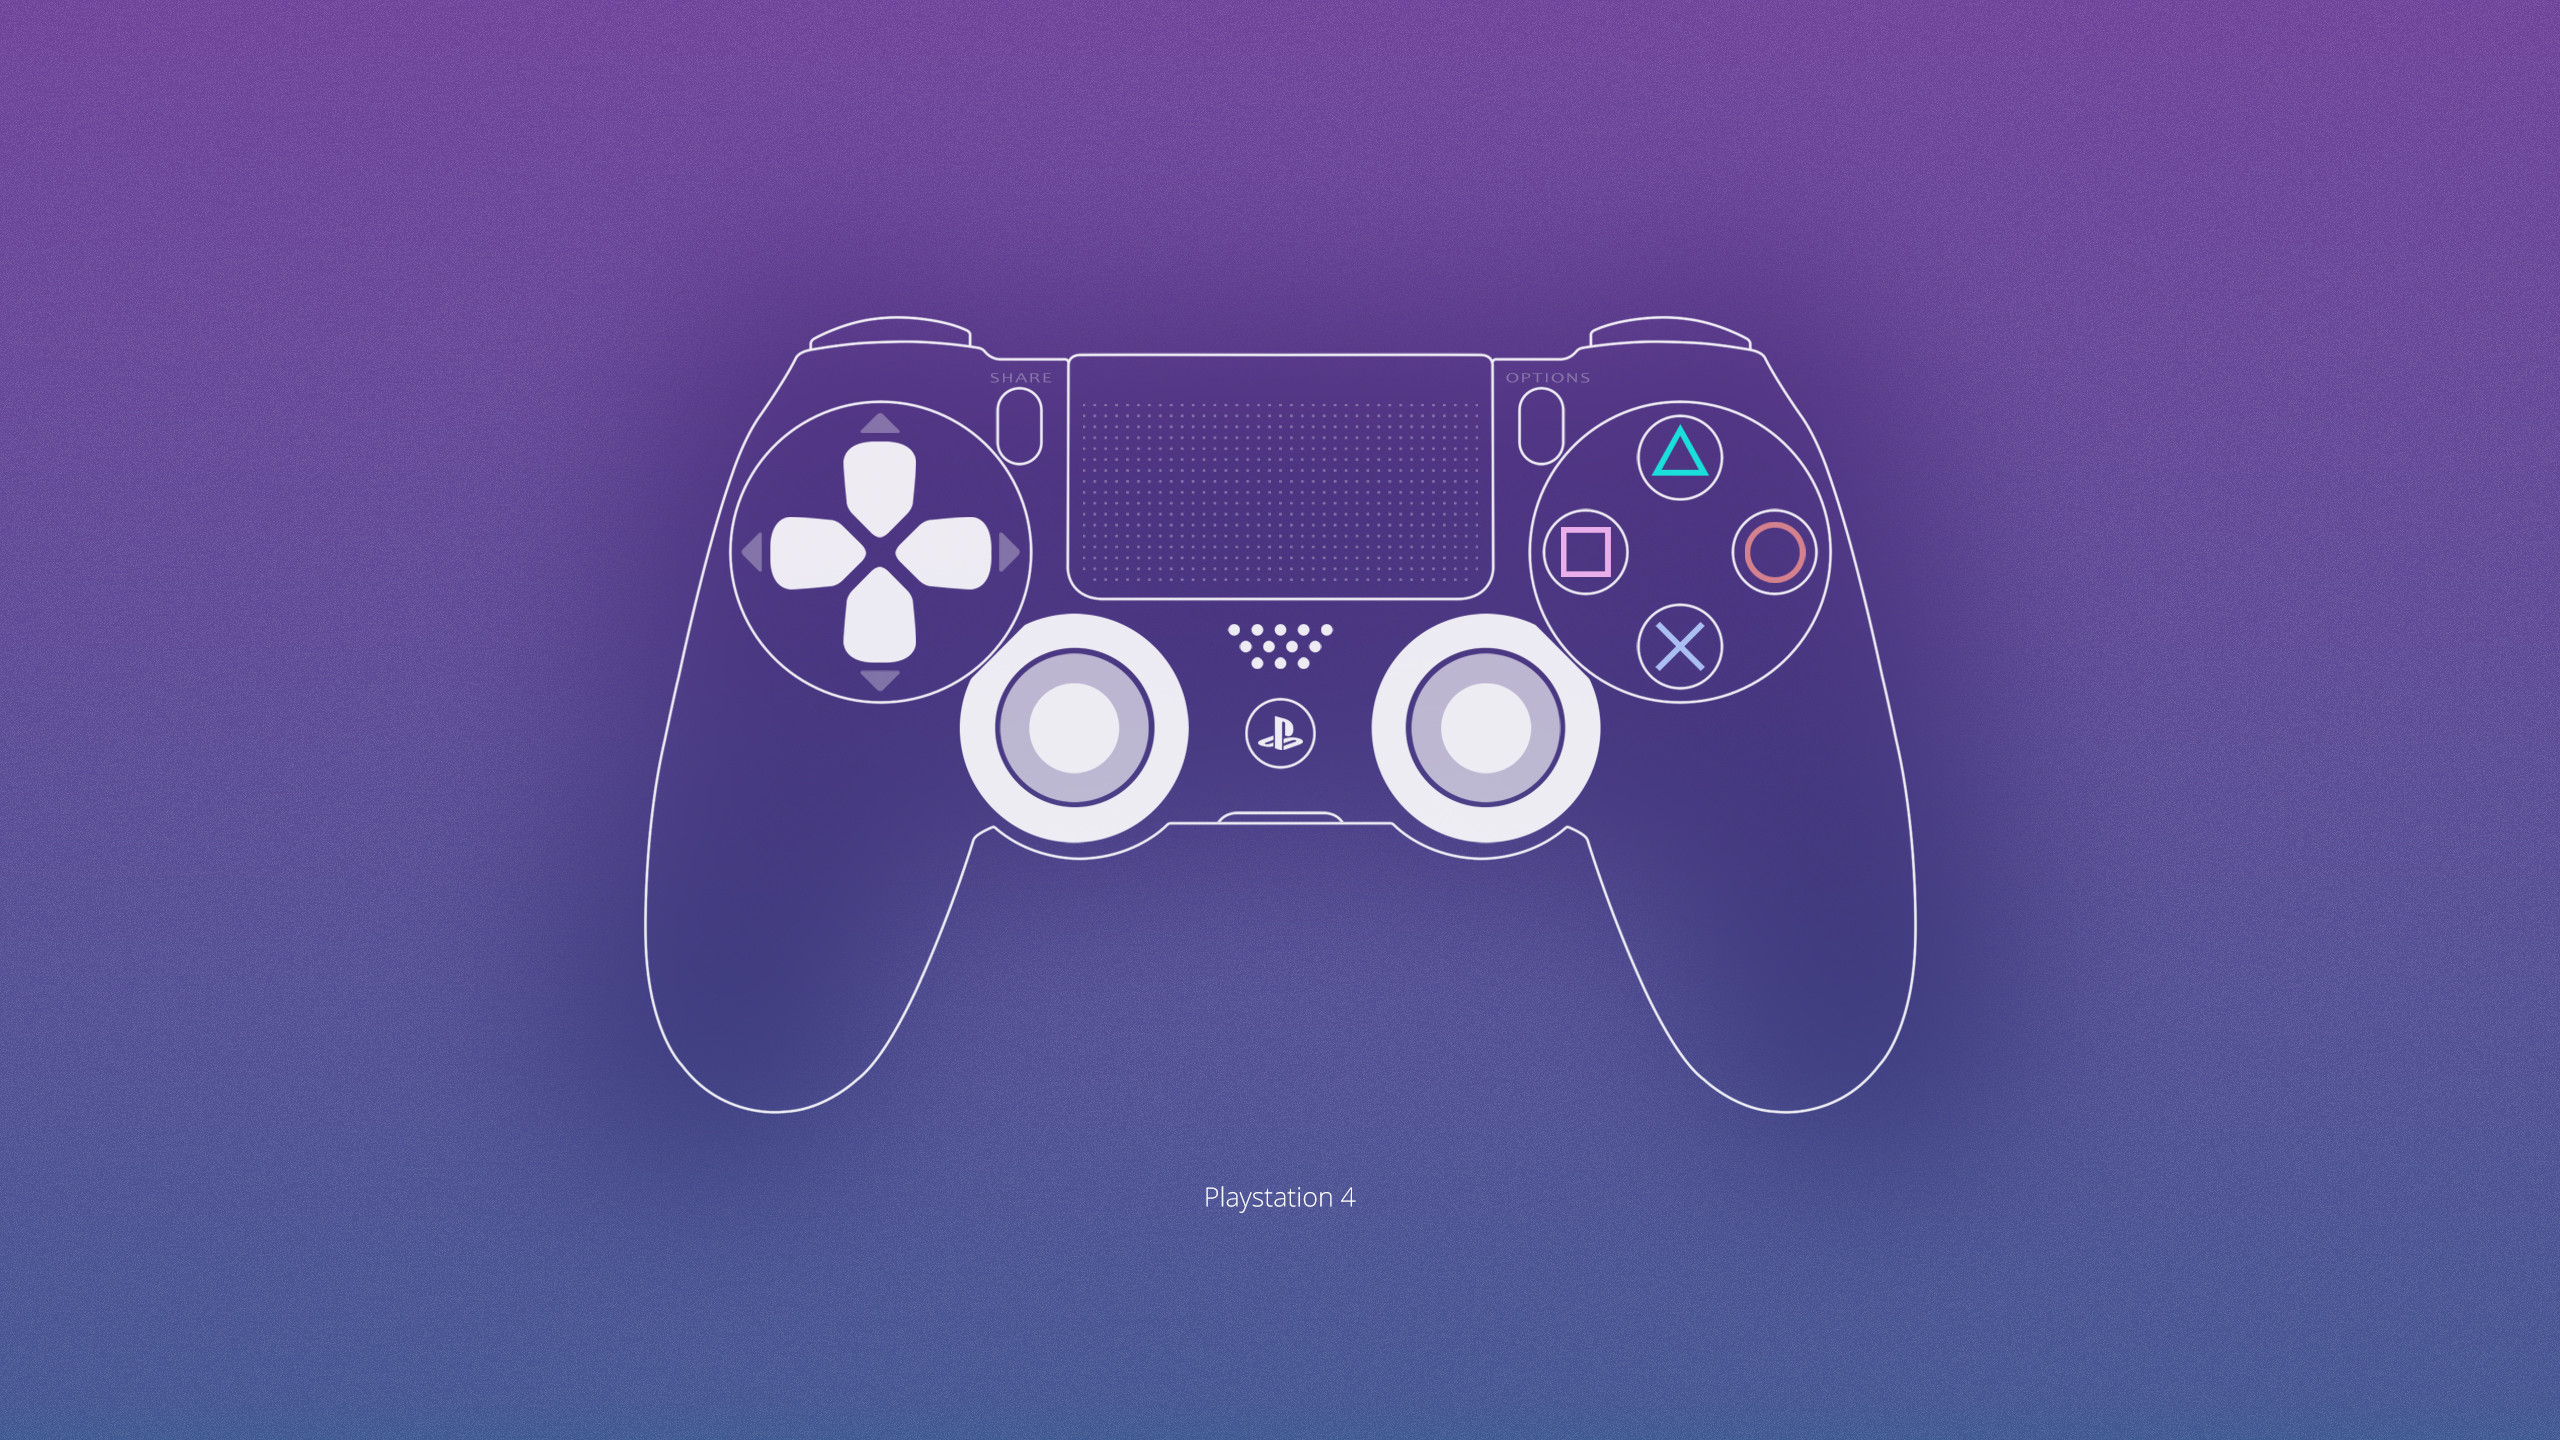 2560x1440 Playstation Vita wallpaper thread | Customizing dat OLED screen - Page 36 -  NeoGAF | Wallpapers | Pinterest